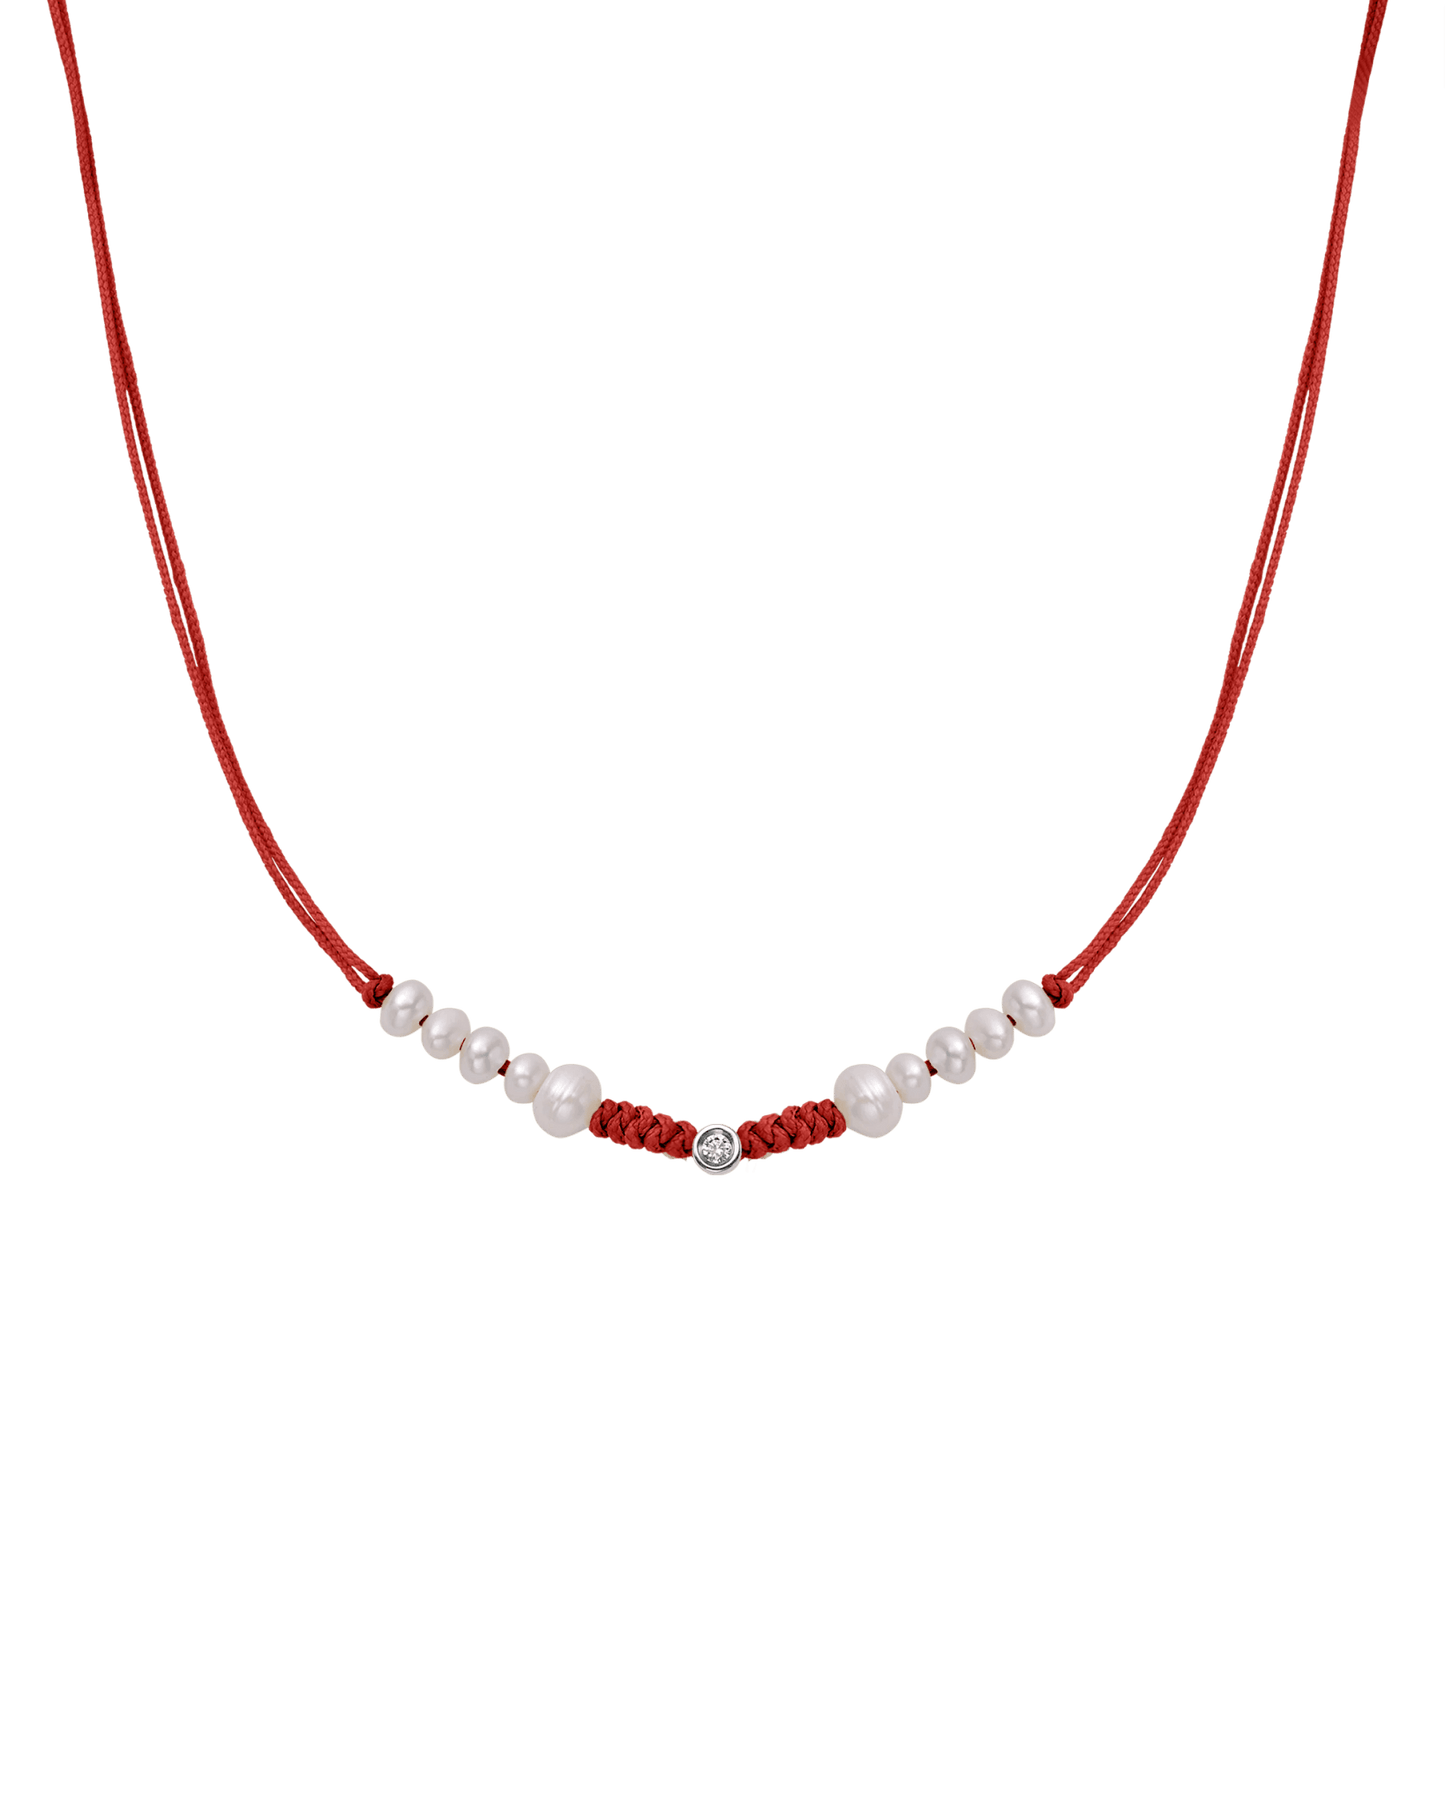 Ten Natural Pearl String of Love Necklace - 14K White Gold Necklaces 14K Solid Gold Red Small: 0.03ct 